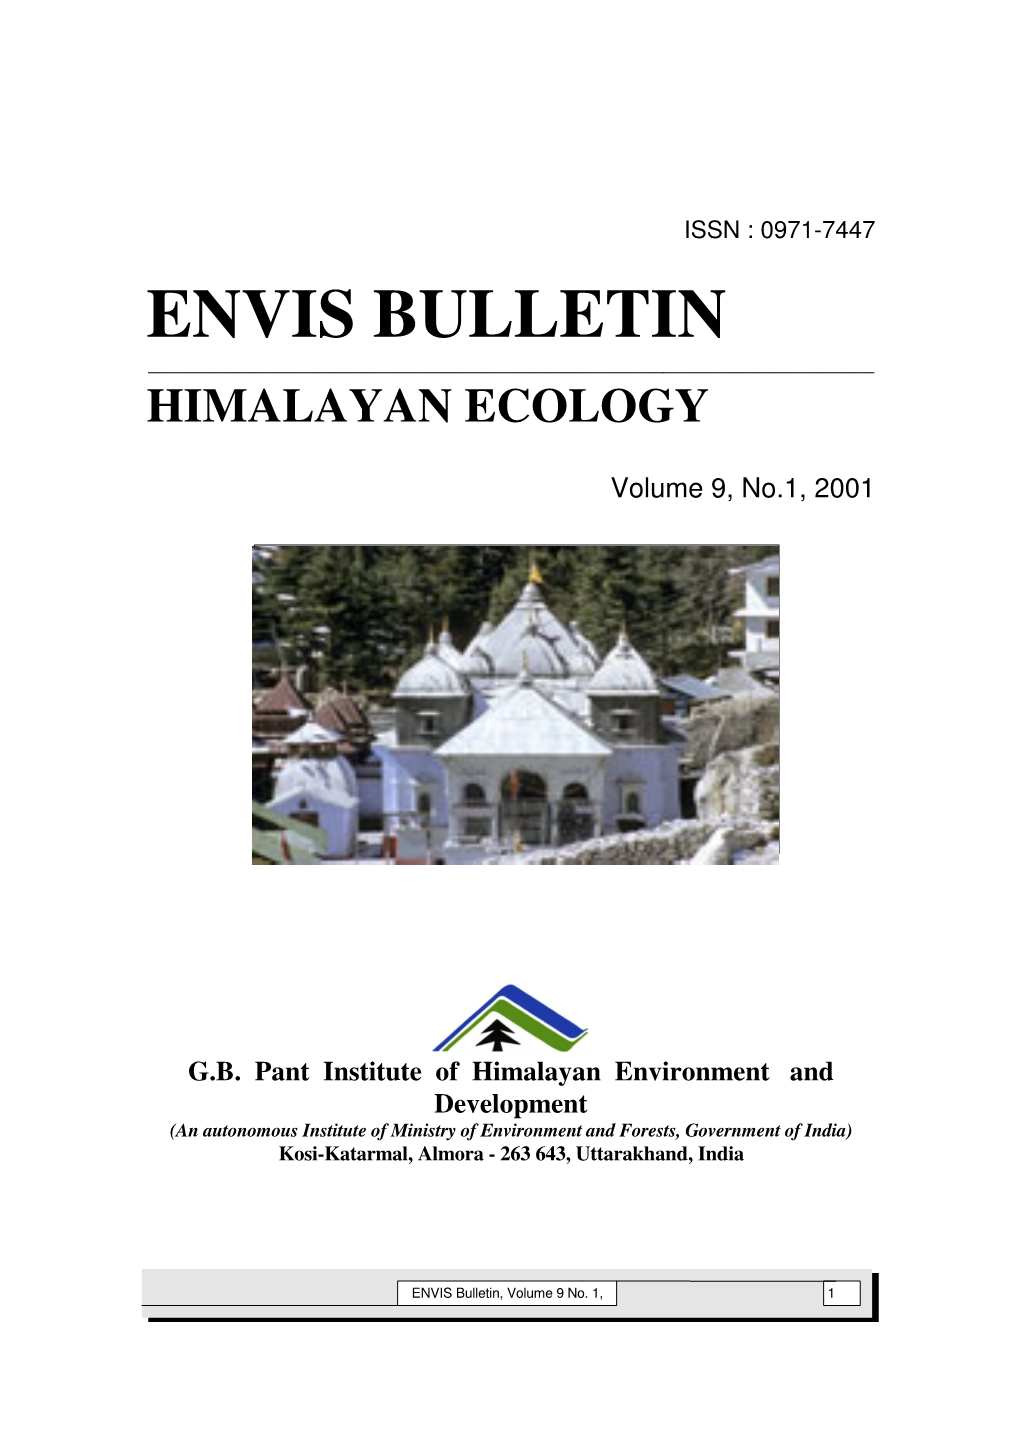 Vol 18 No.2, Anuran Fauna of Northeast Remedation Studies with Phytoplankton and India